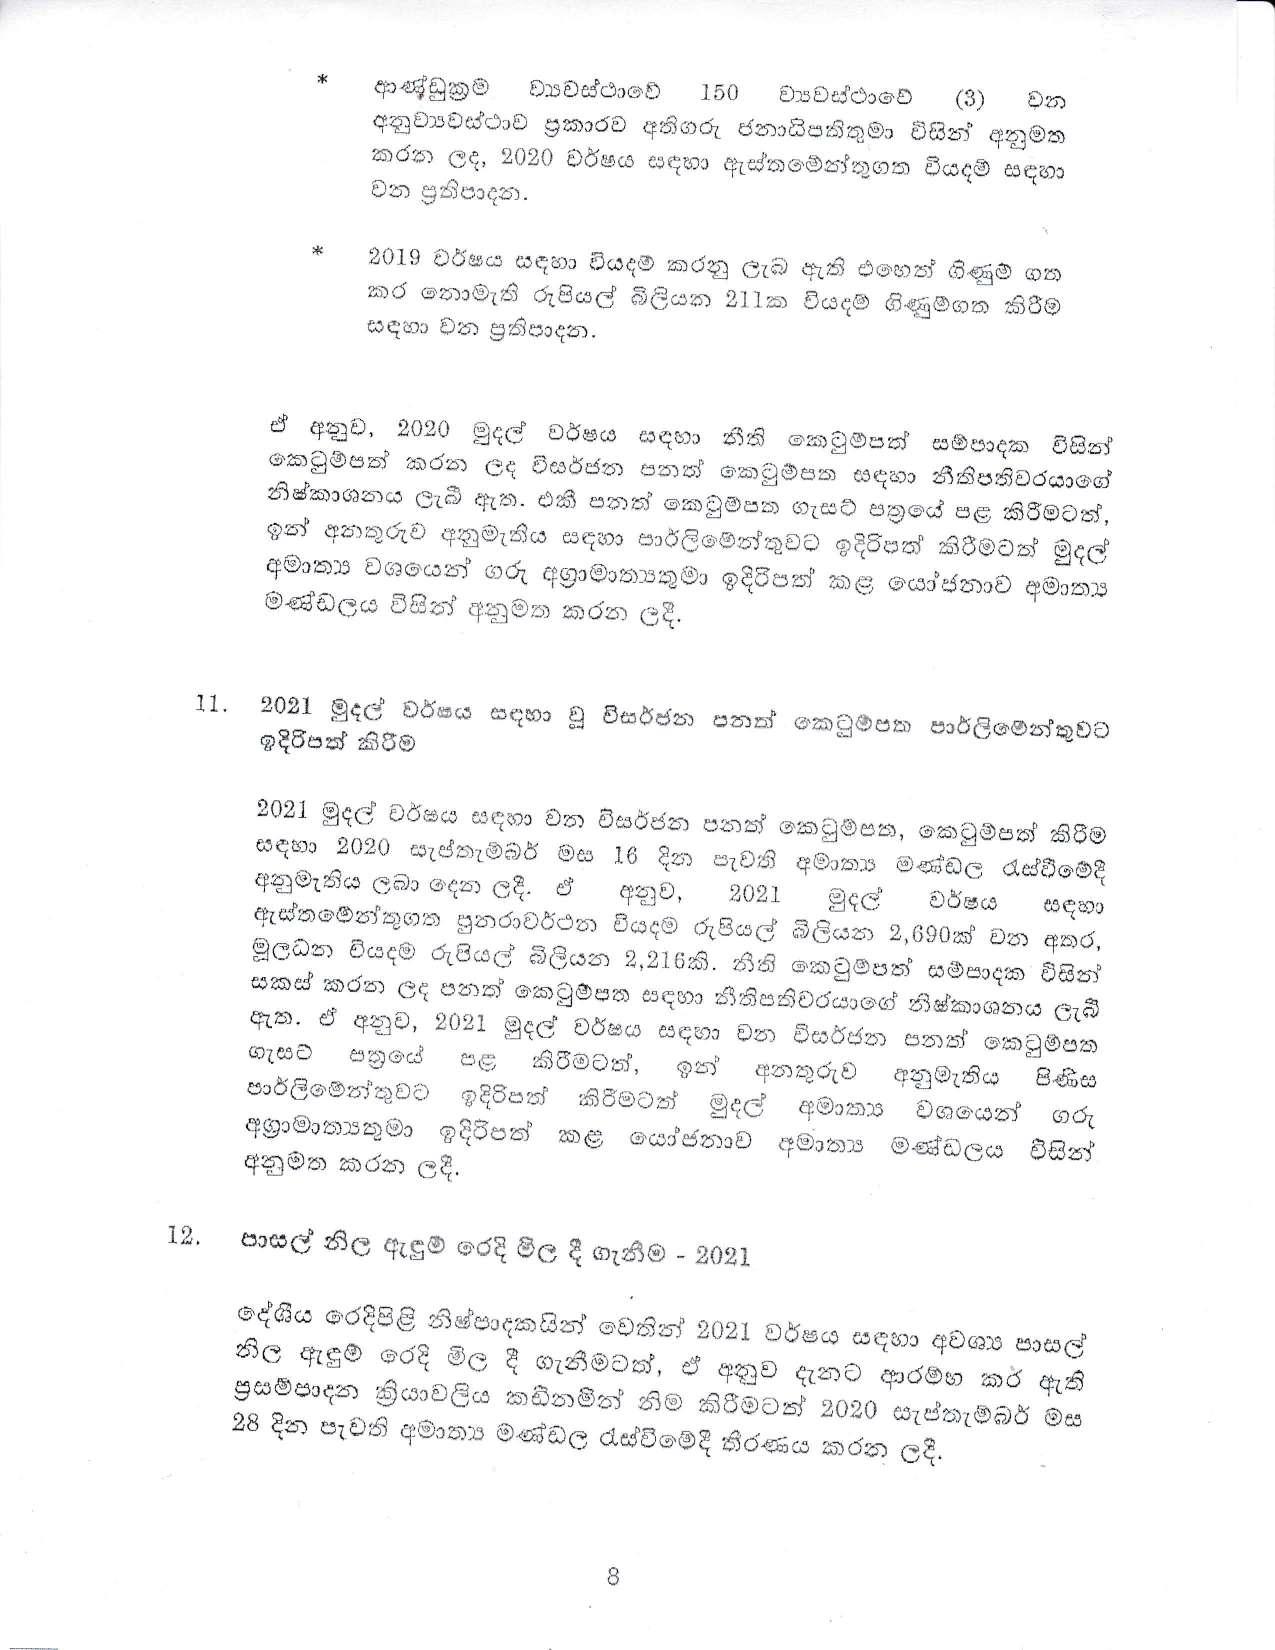 Cabinet Decision on 05.10.2020 compressed page 008